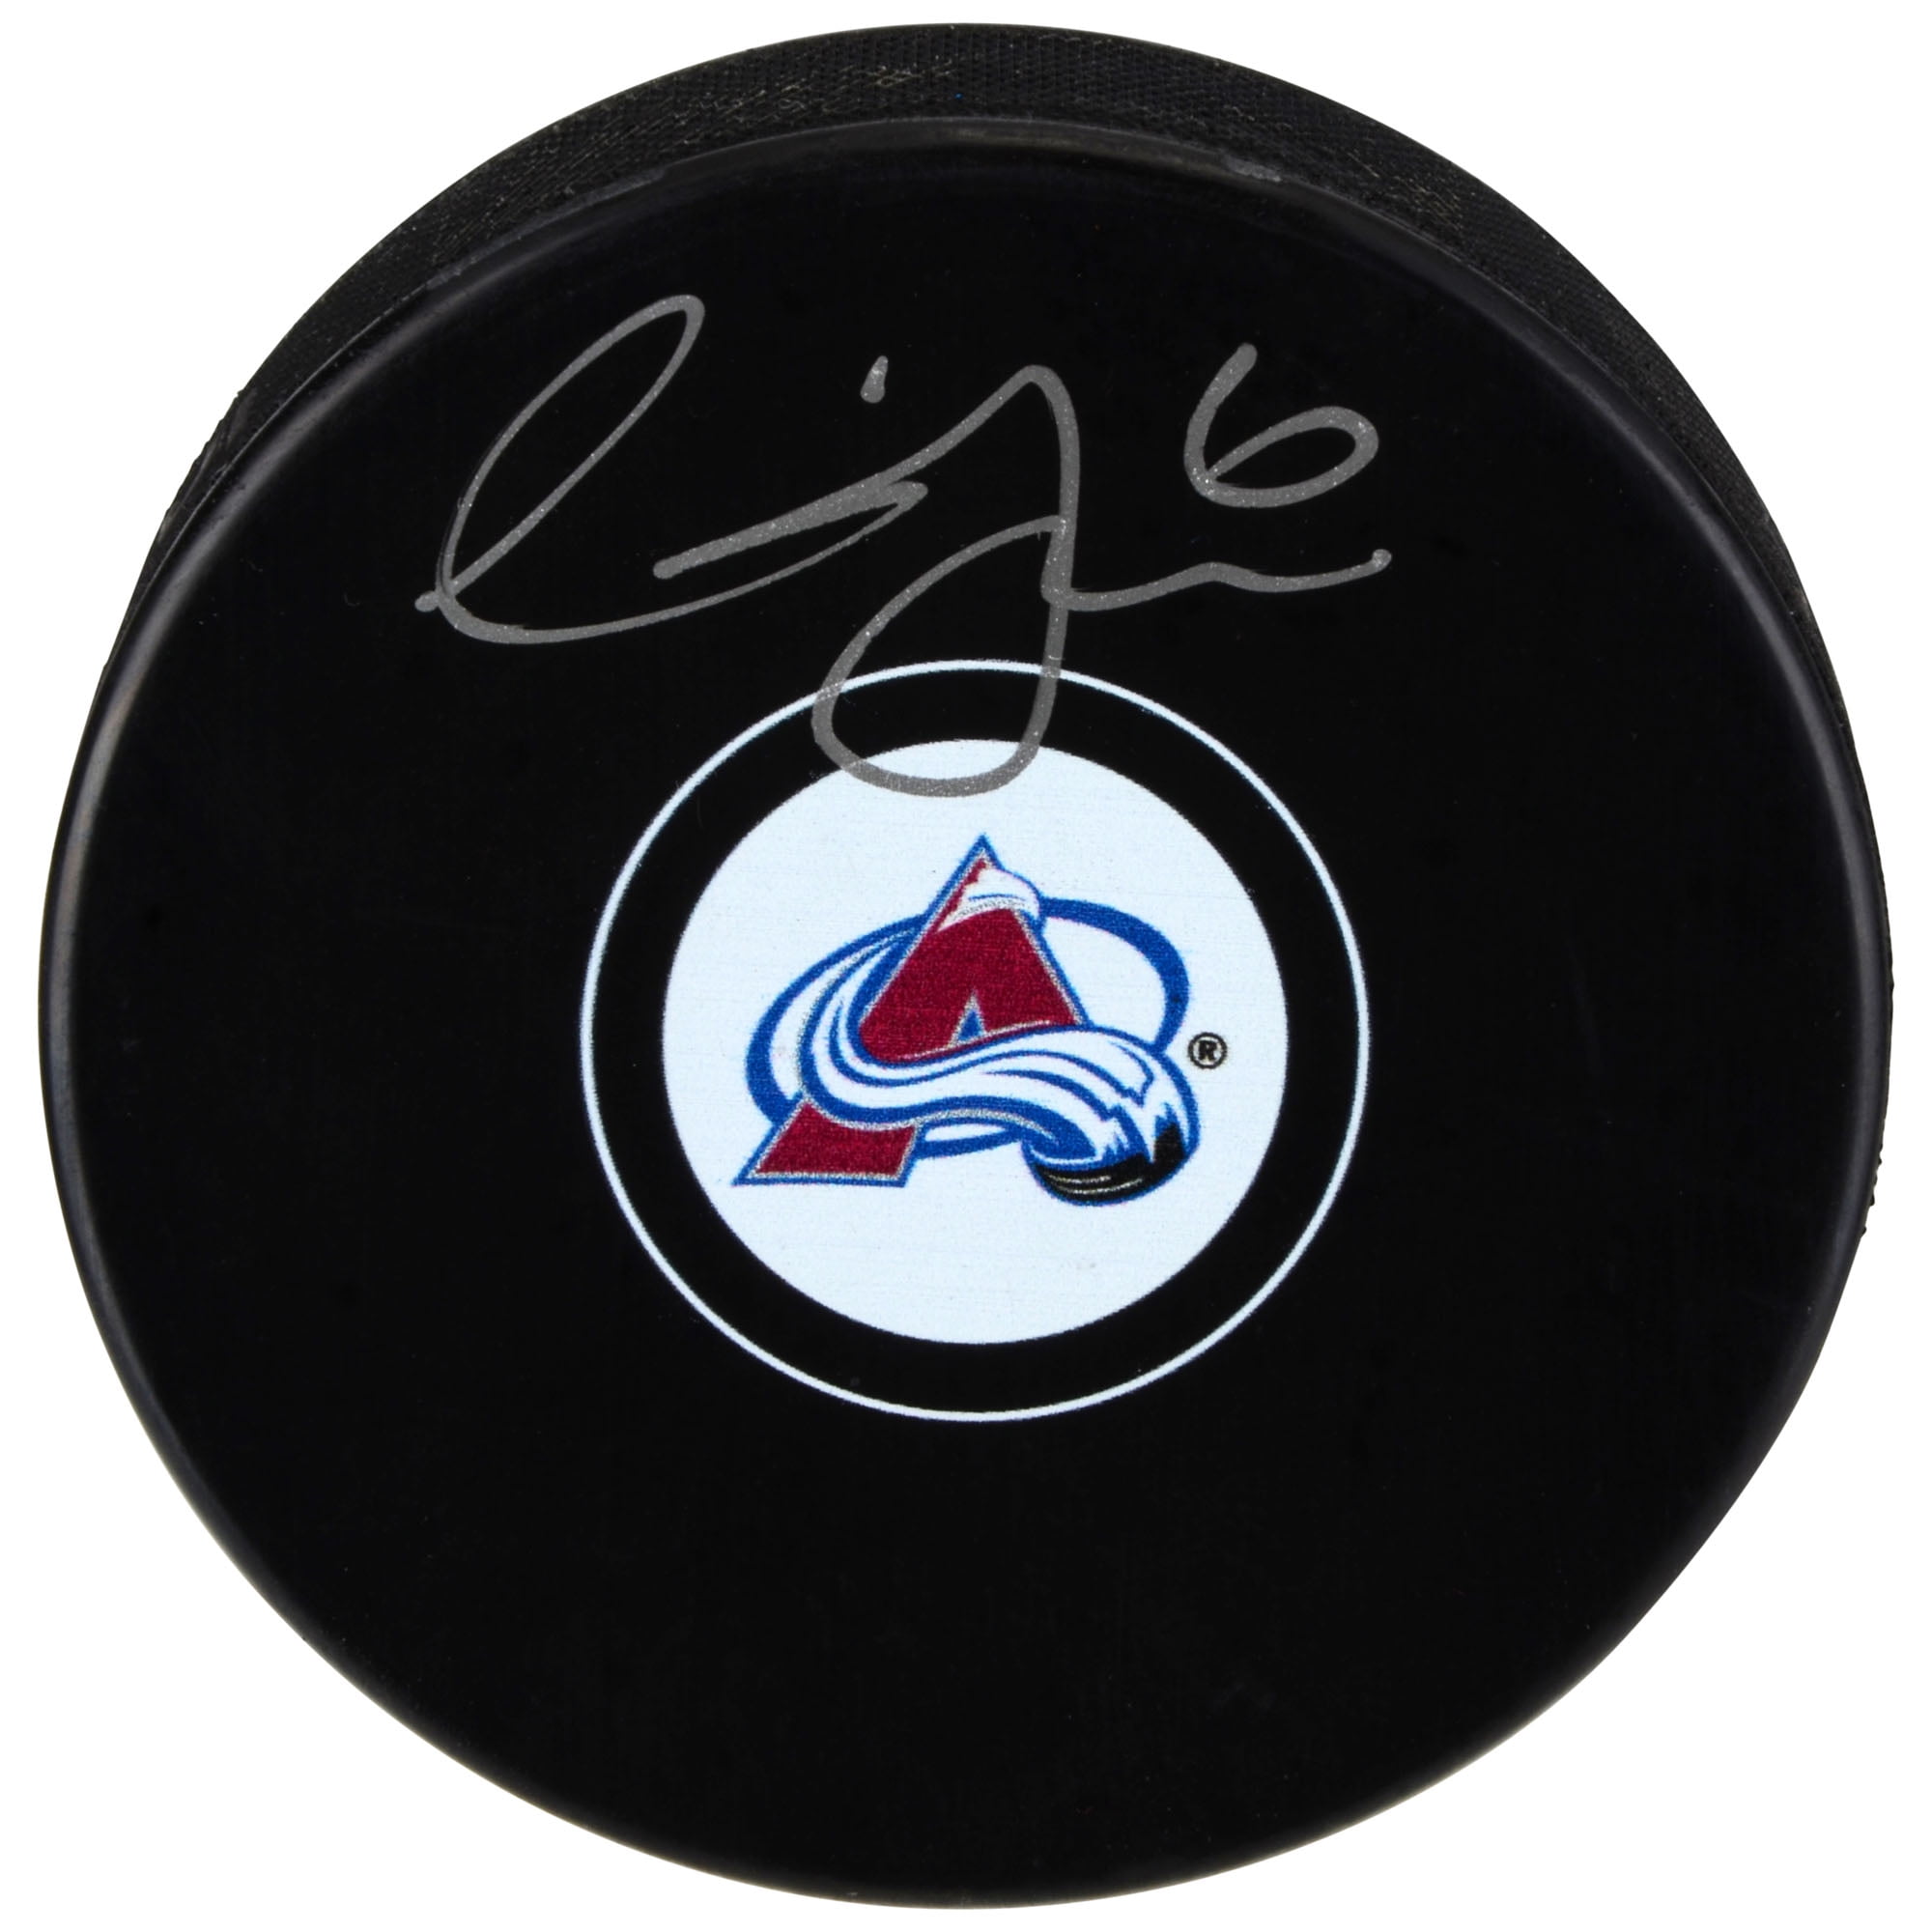 Colorado Avalanche Ultimate Fan Collectibles Bundle - Includes Team Impact  15 x 17 Frame, Mini Goalie Mask, and Official Game Puck - NHL Team  Plaques and Collages at 's Sports Collectibles Store